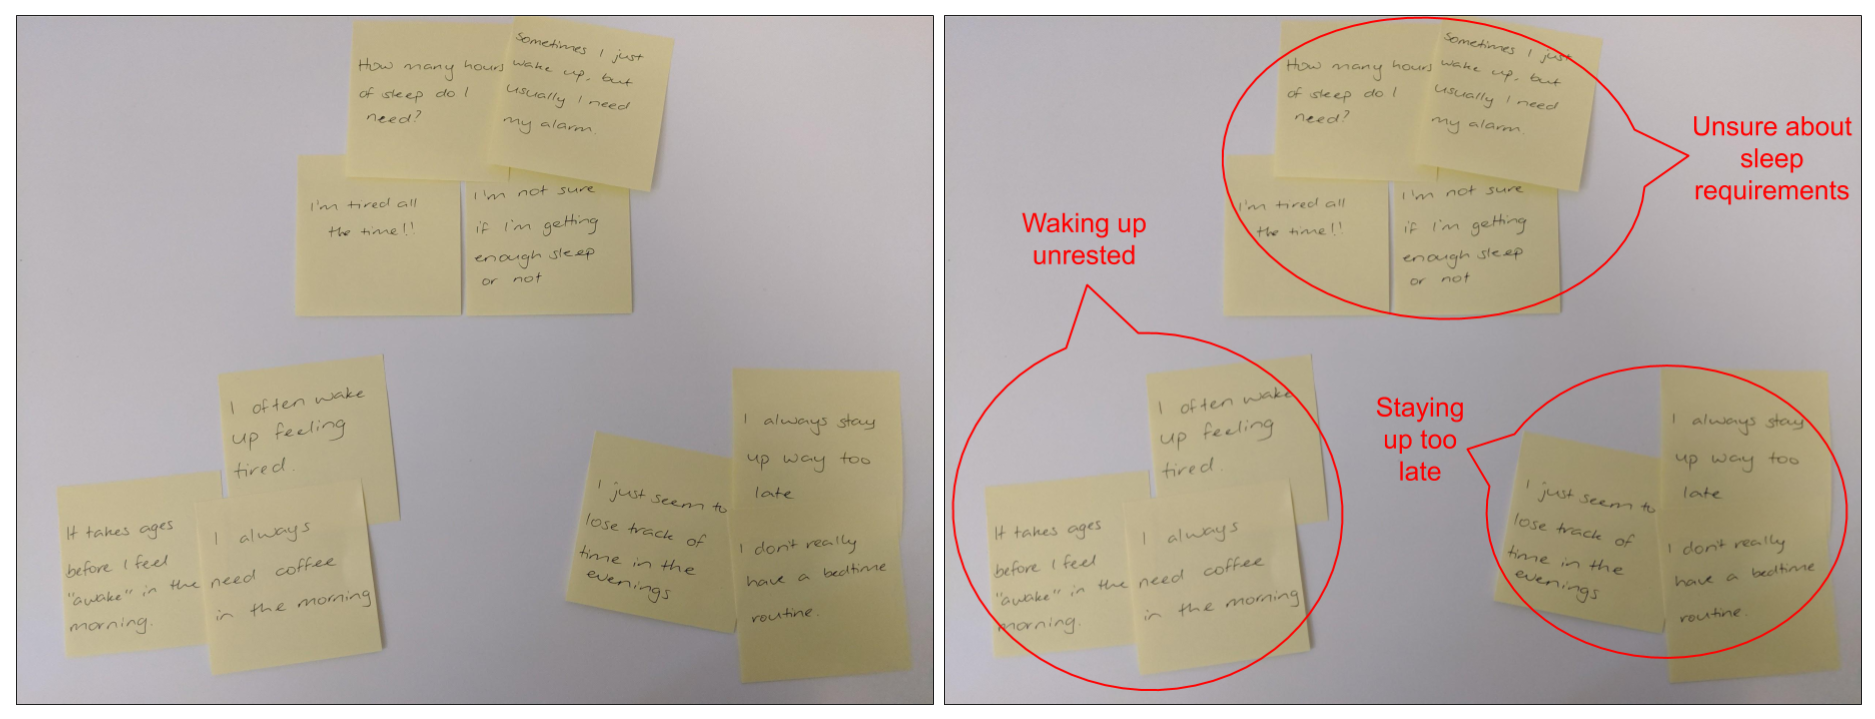 Two photographs of the same example Affinity Diagram. The diagram on the right shows the diagram with three themes highlighted ('Waking up unrested', 'Unsure about sleep requirements', 'Staying up too late').